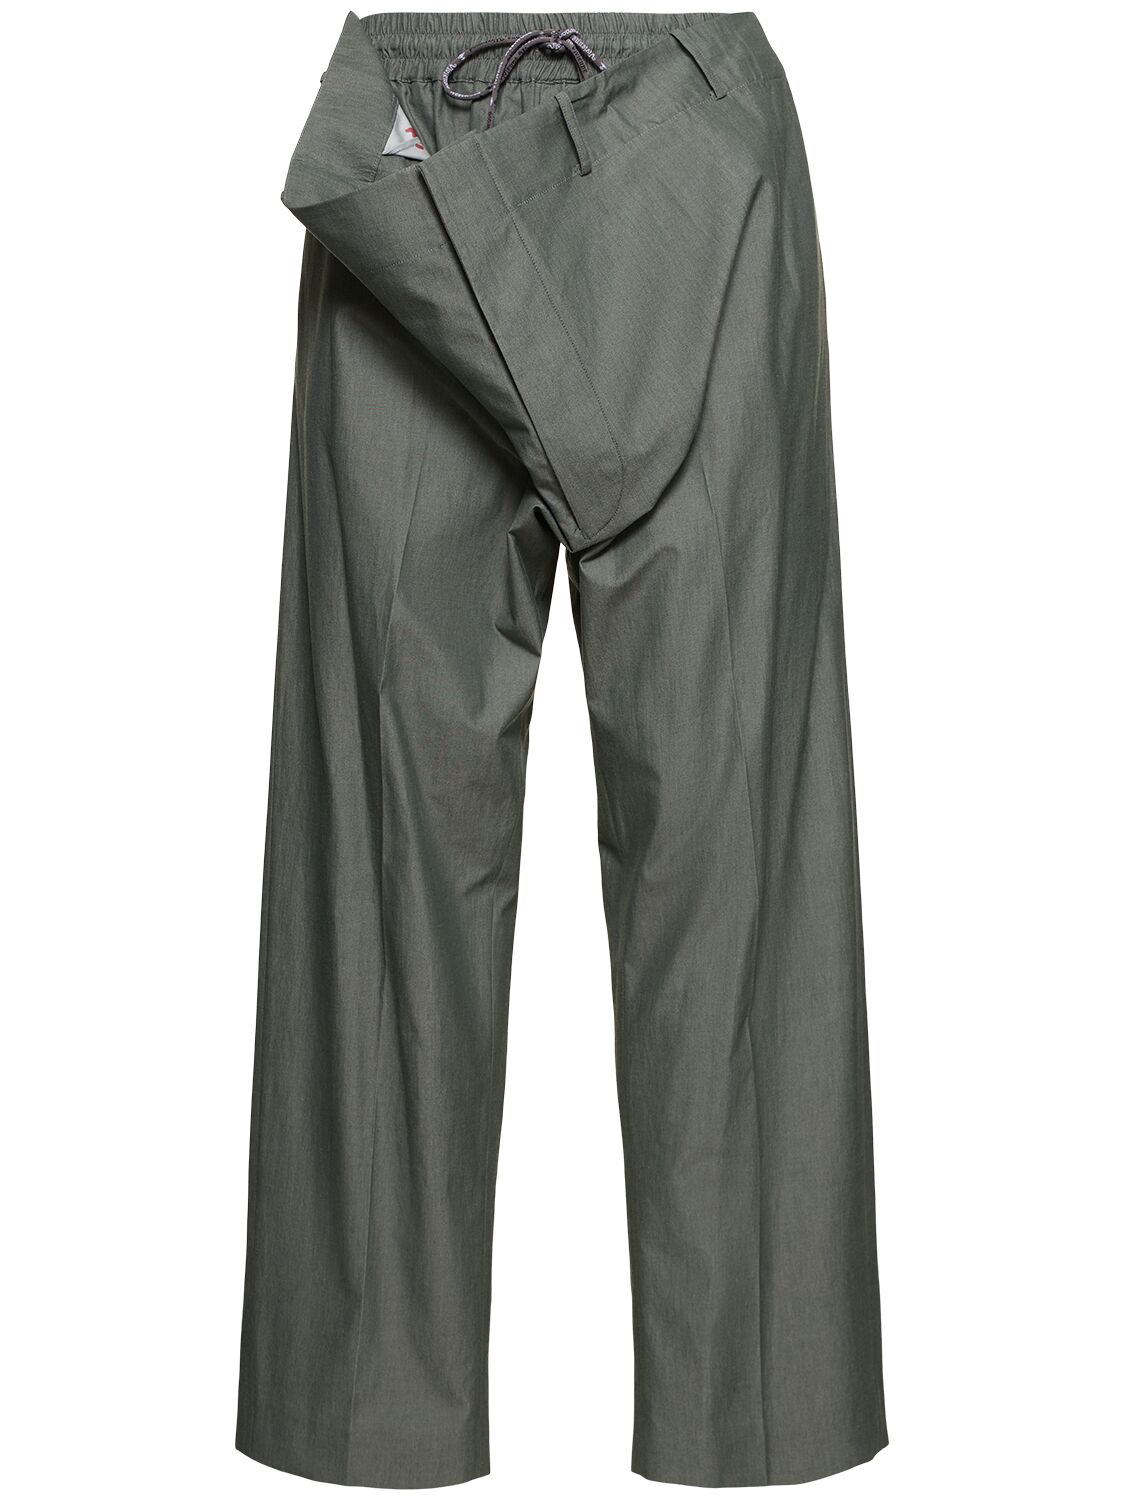 Image of Wreck Cotton Formal Pants